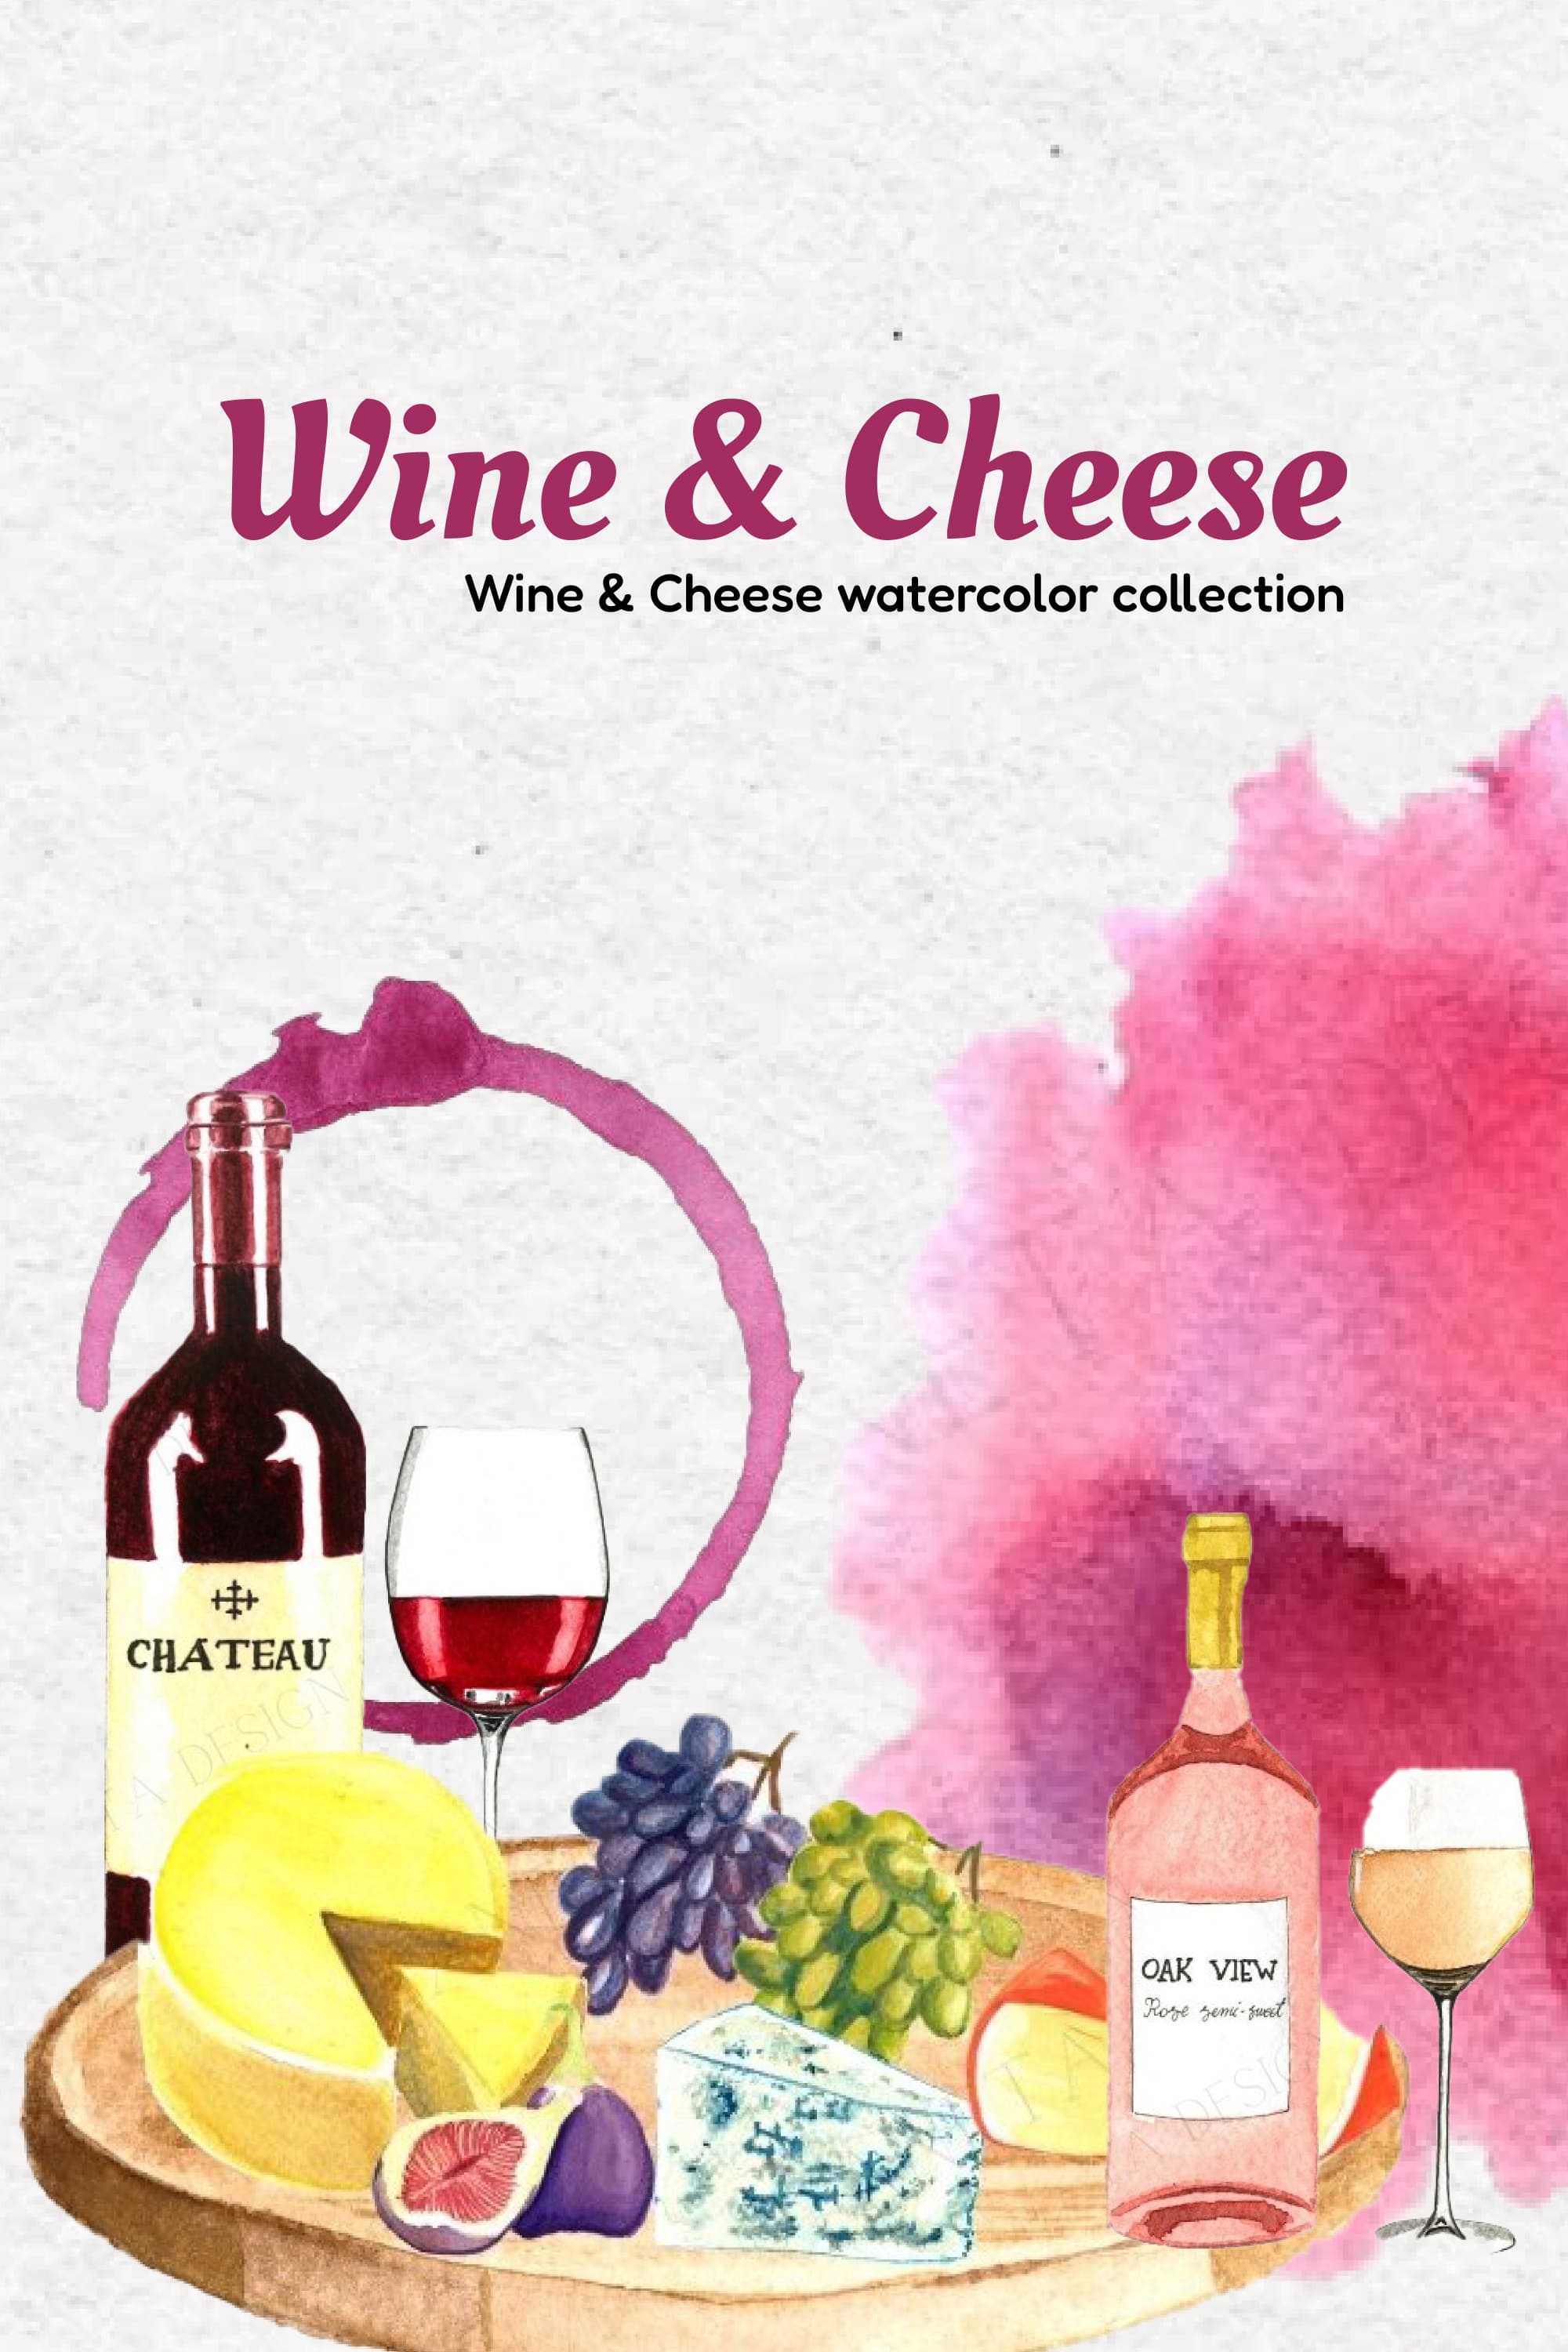 Collection of colorful images of hard cheese, wine bottles, grapes.